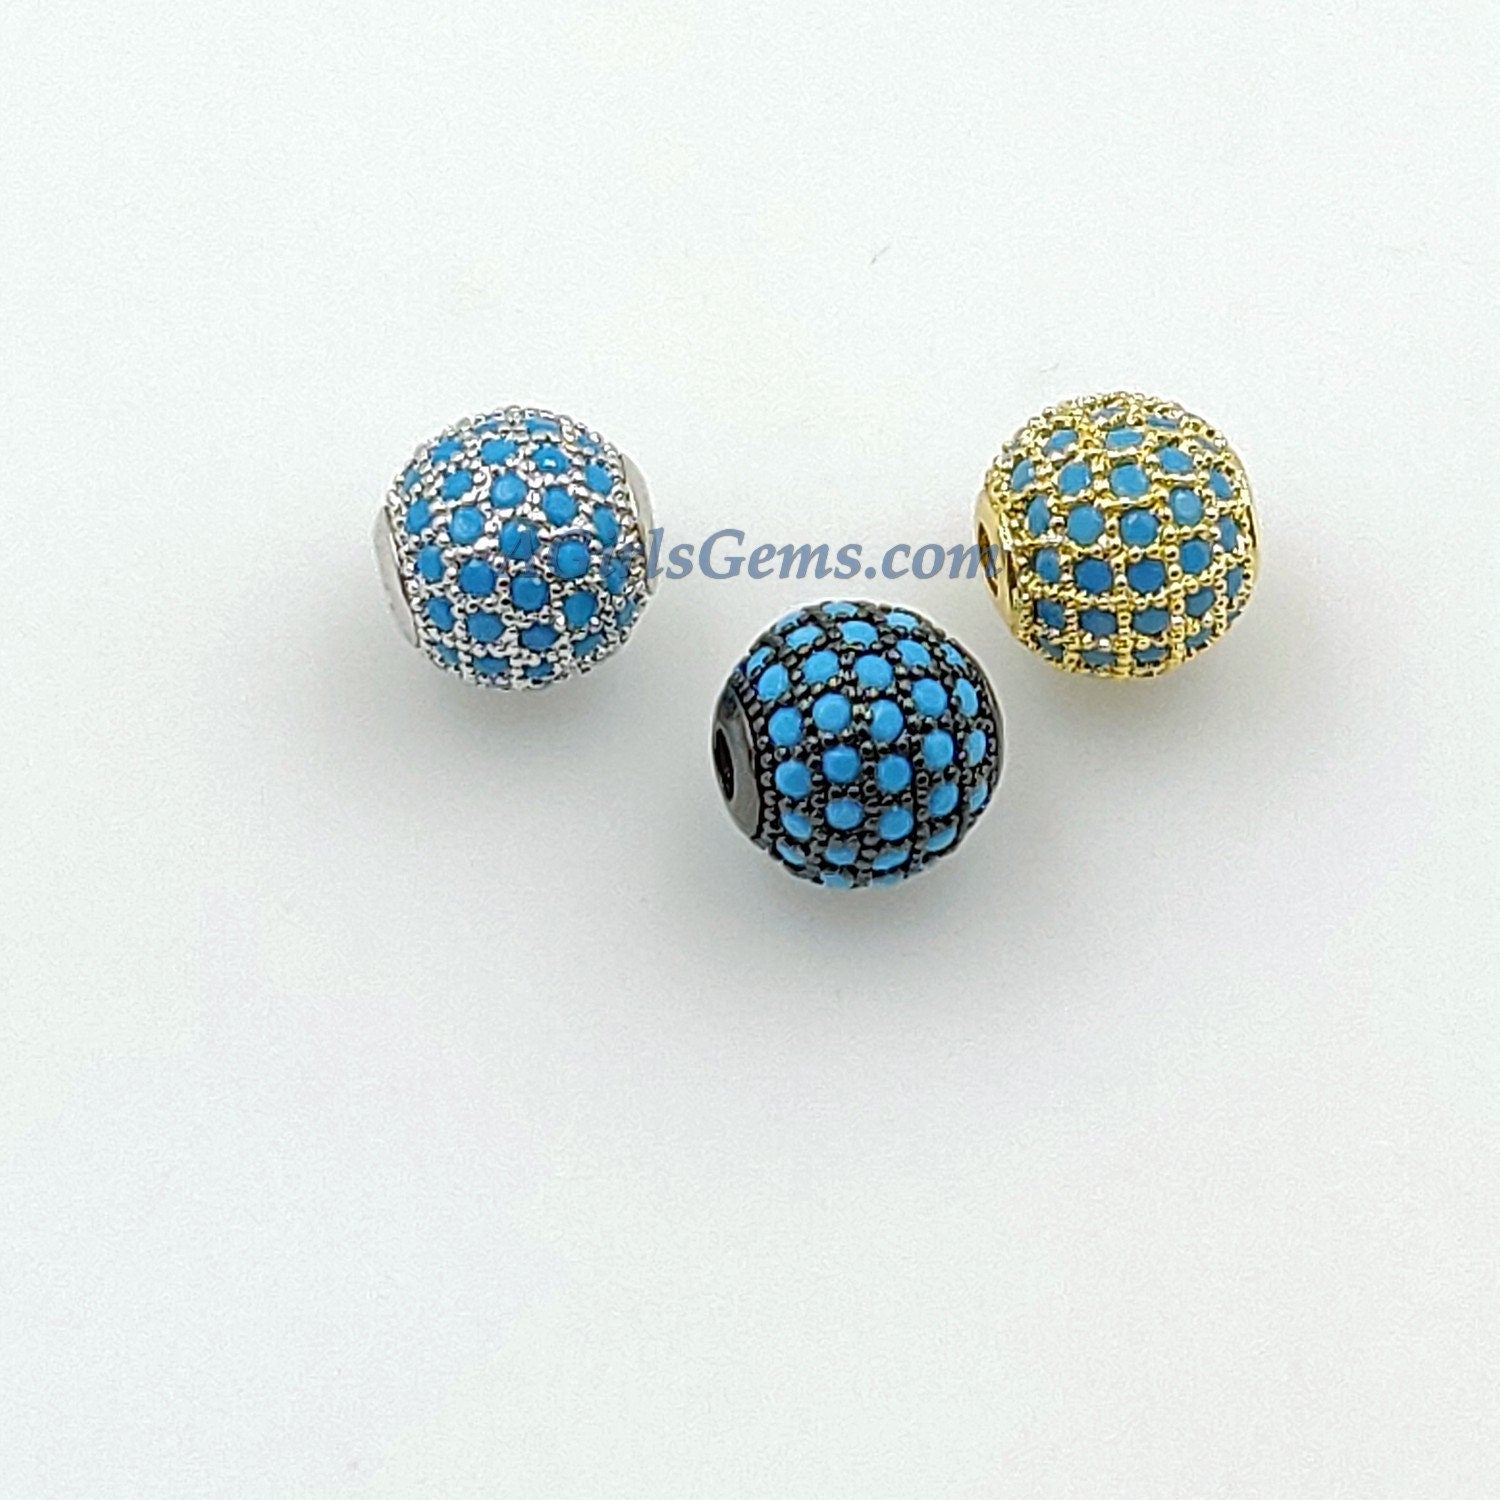 CZ Micro Pave Rainbow Balls, 2 Pcs 6 mm Gold Multi Colored Round Beads, 10 mm Black Silver Focal Bead